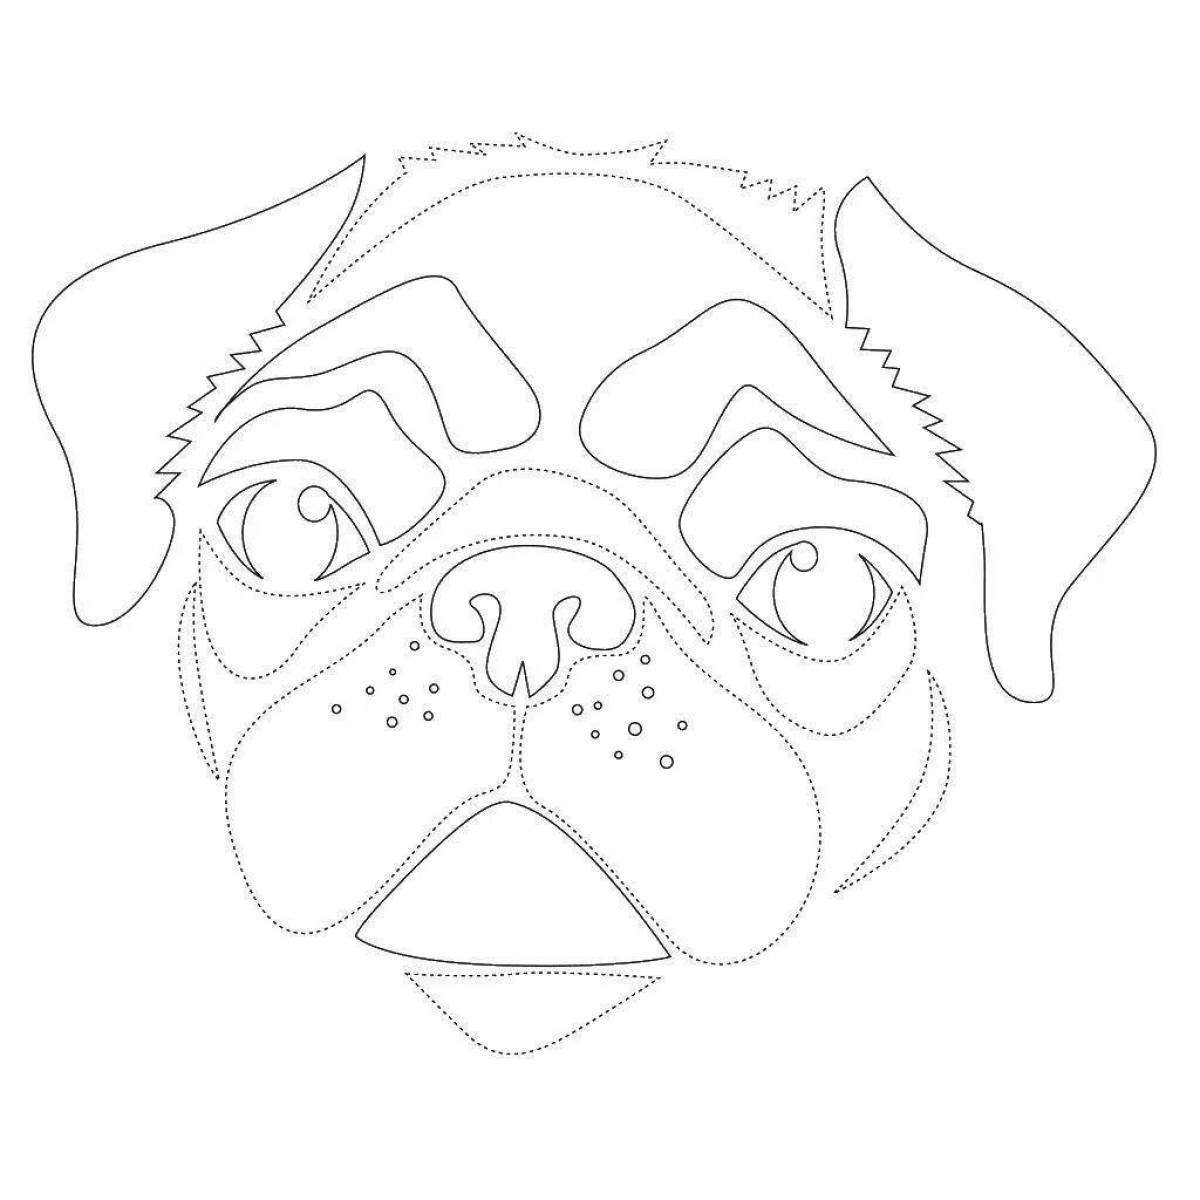 Adorable dog face coloring page